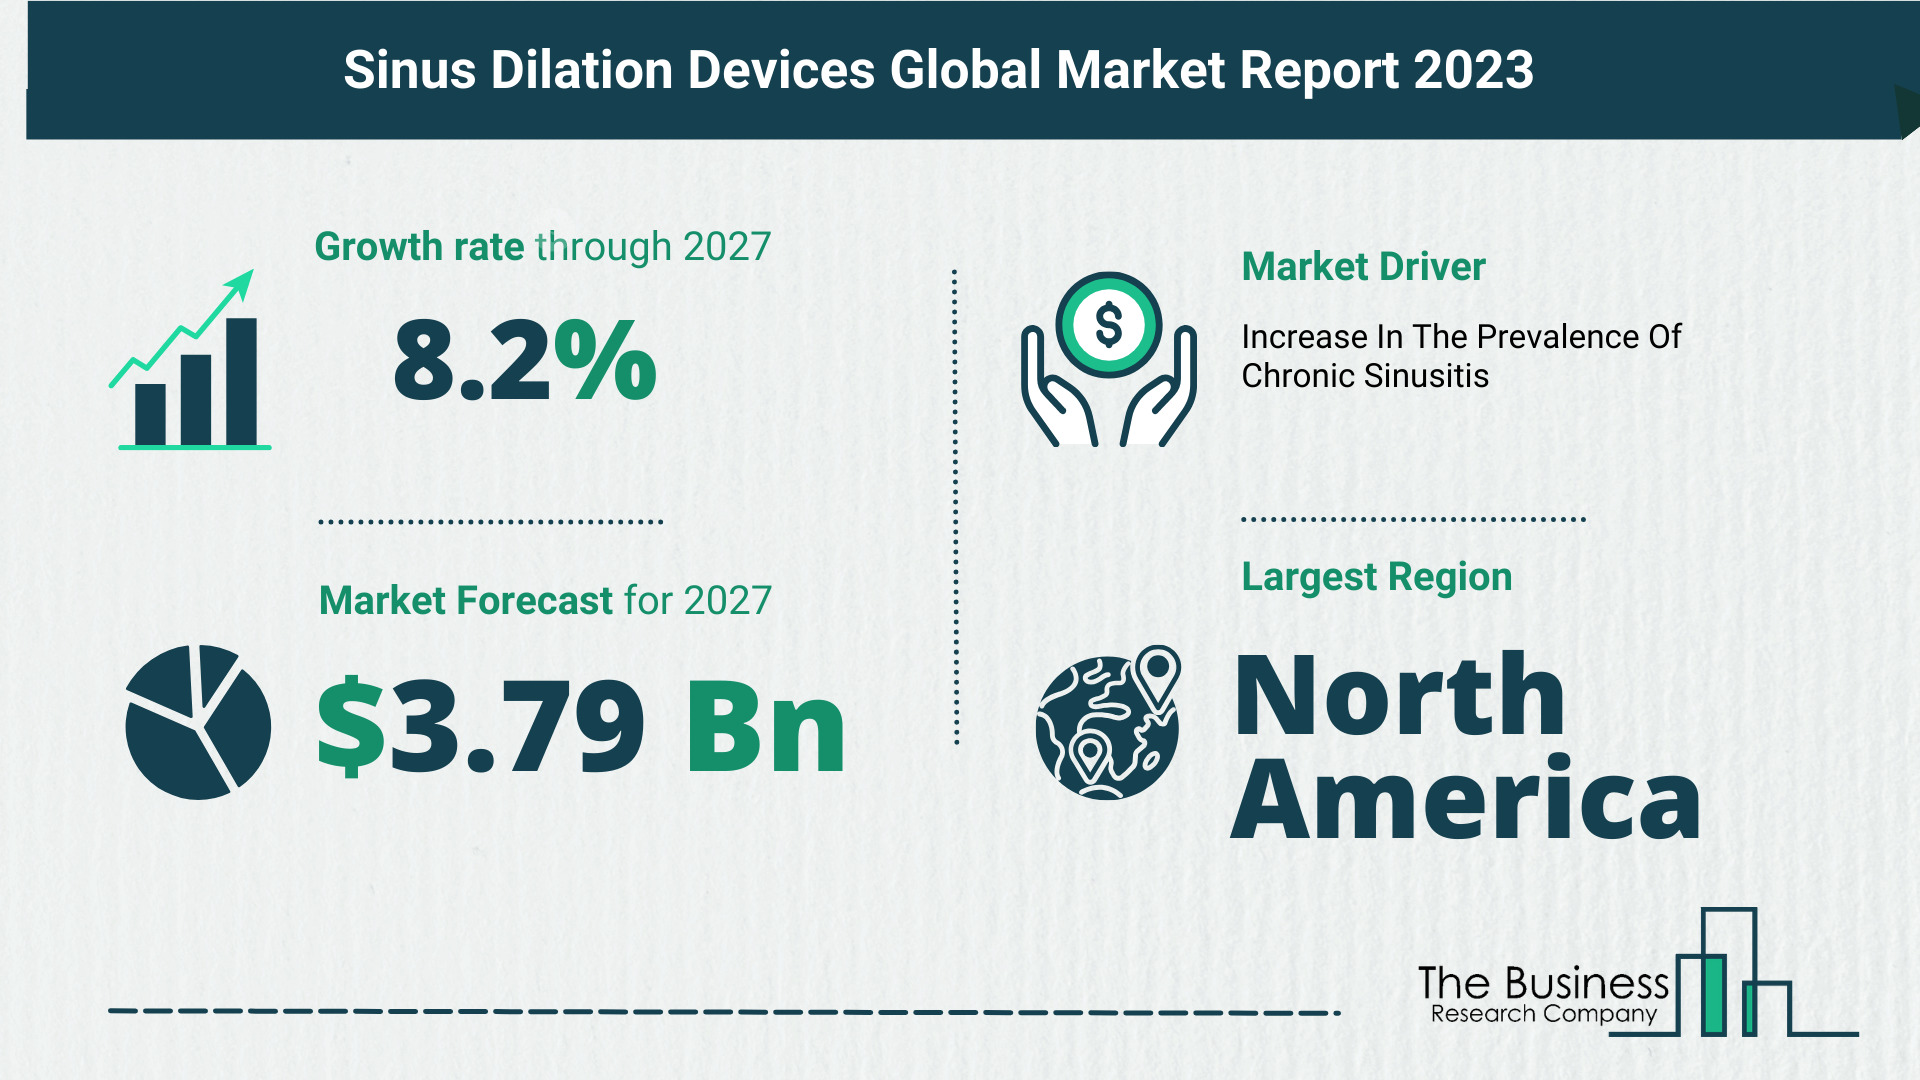 5 Key Insights On The Sinus Dilation Devices Market 2023